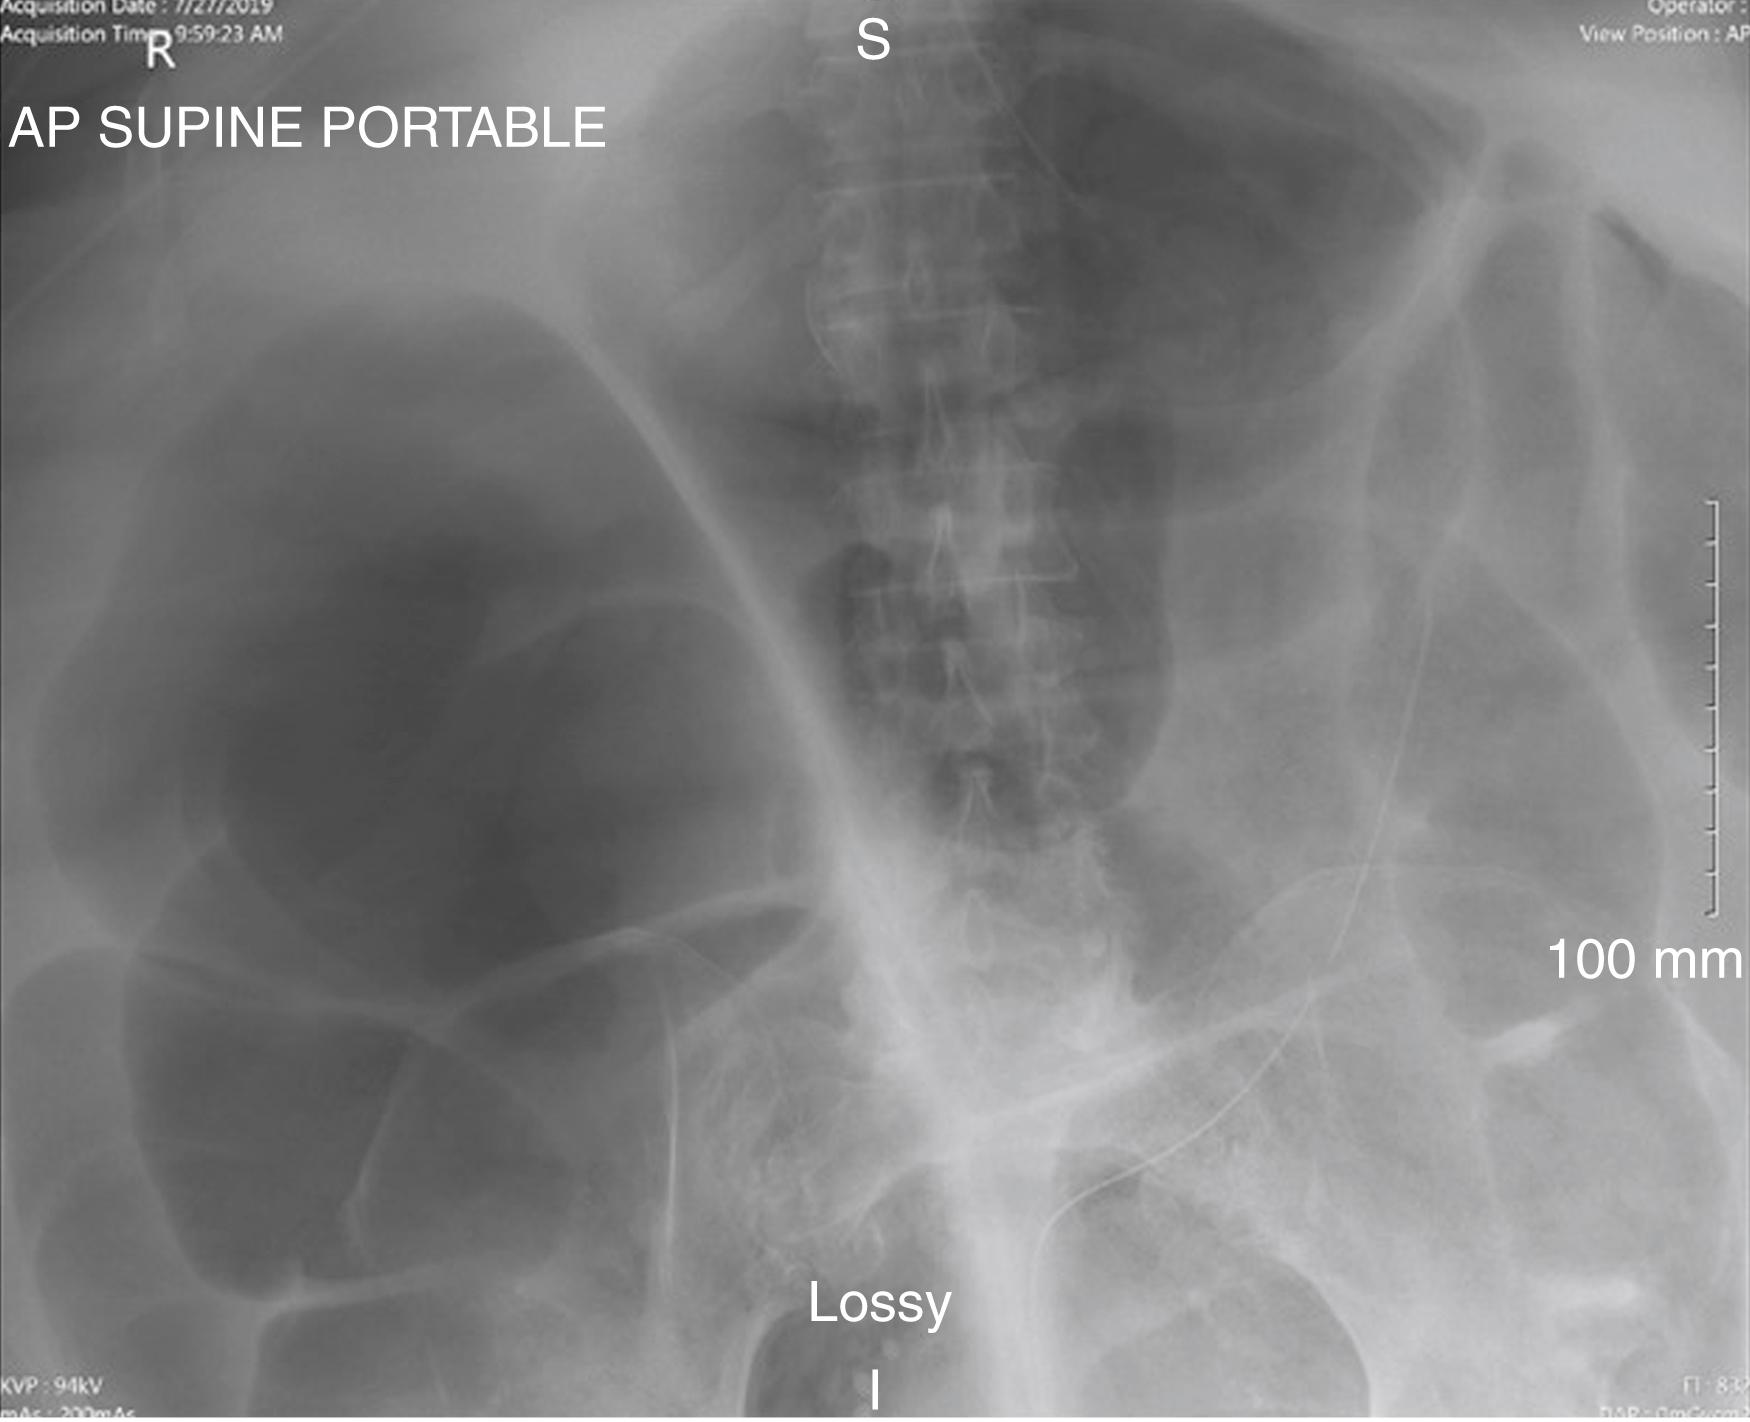 Fig. 52.28, Massive transverse colon distension due to Ogilvie syndrome in a woman with multiple comorbidities including a body mass index of 69, severe pulmonary hypertension, and cardiac disease.